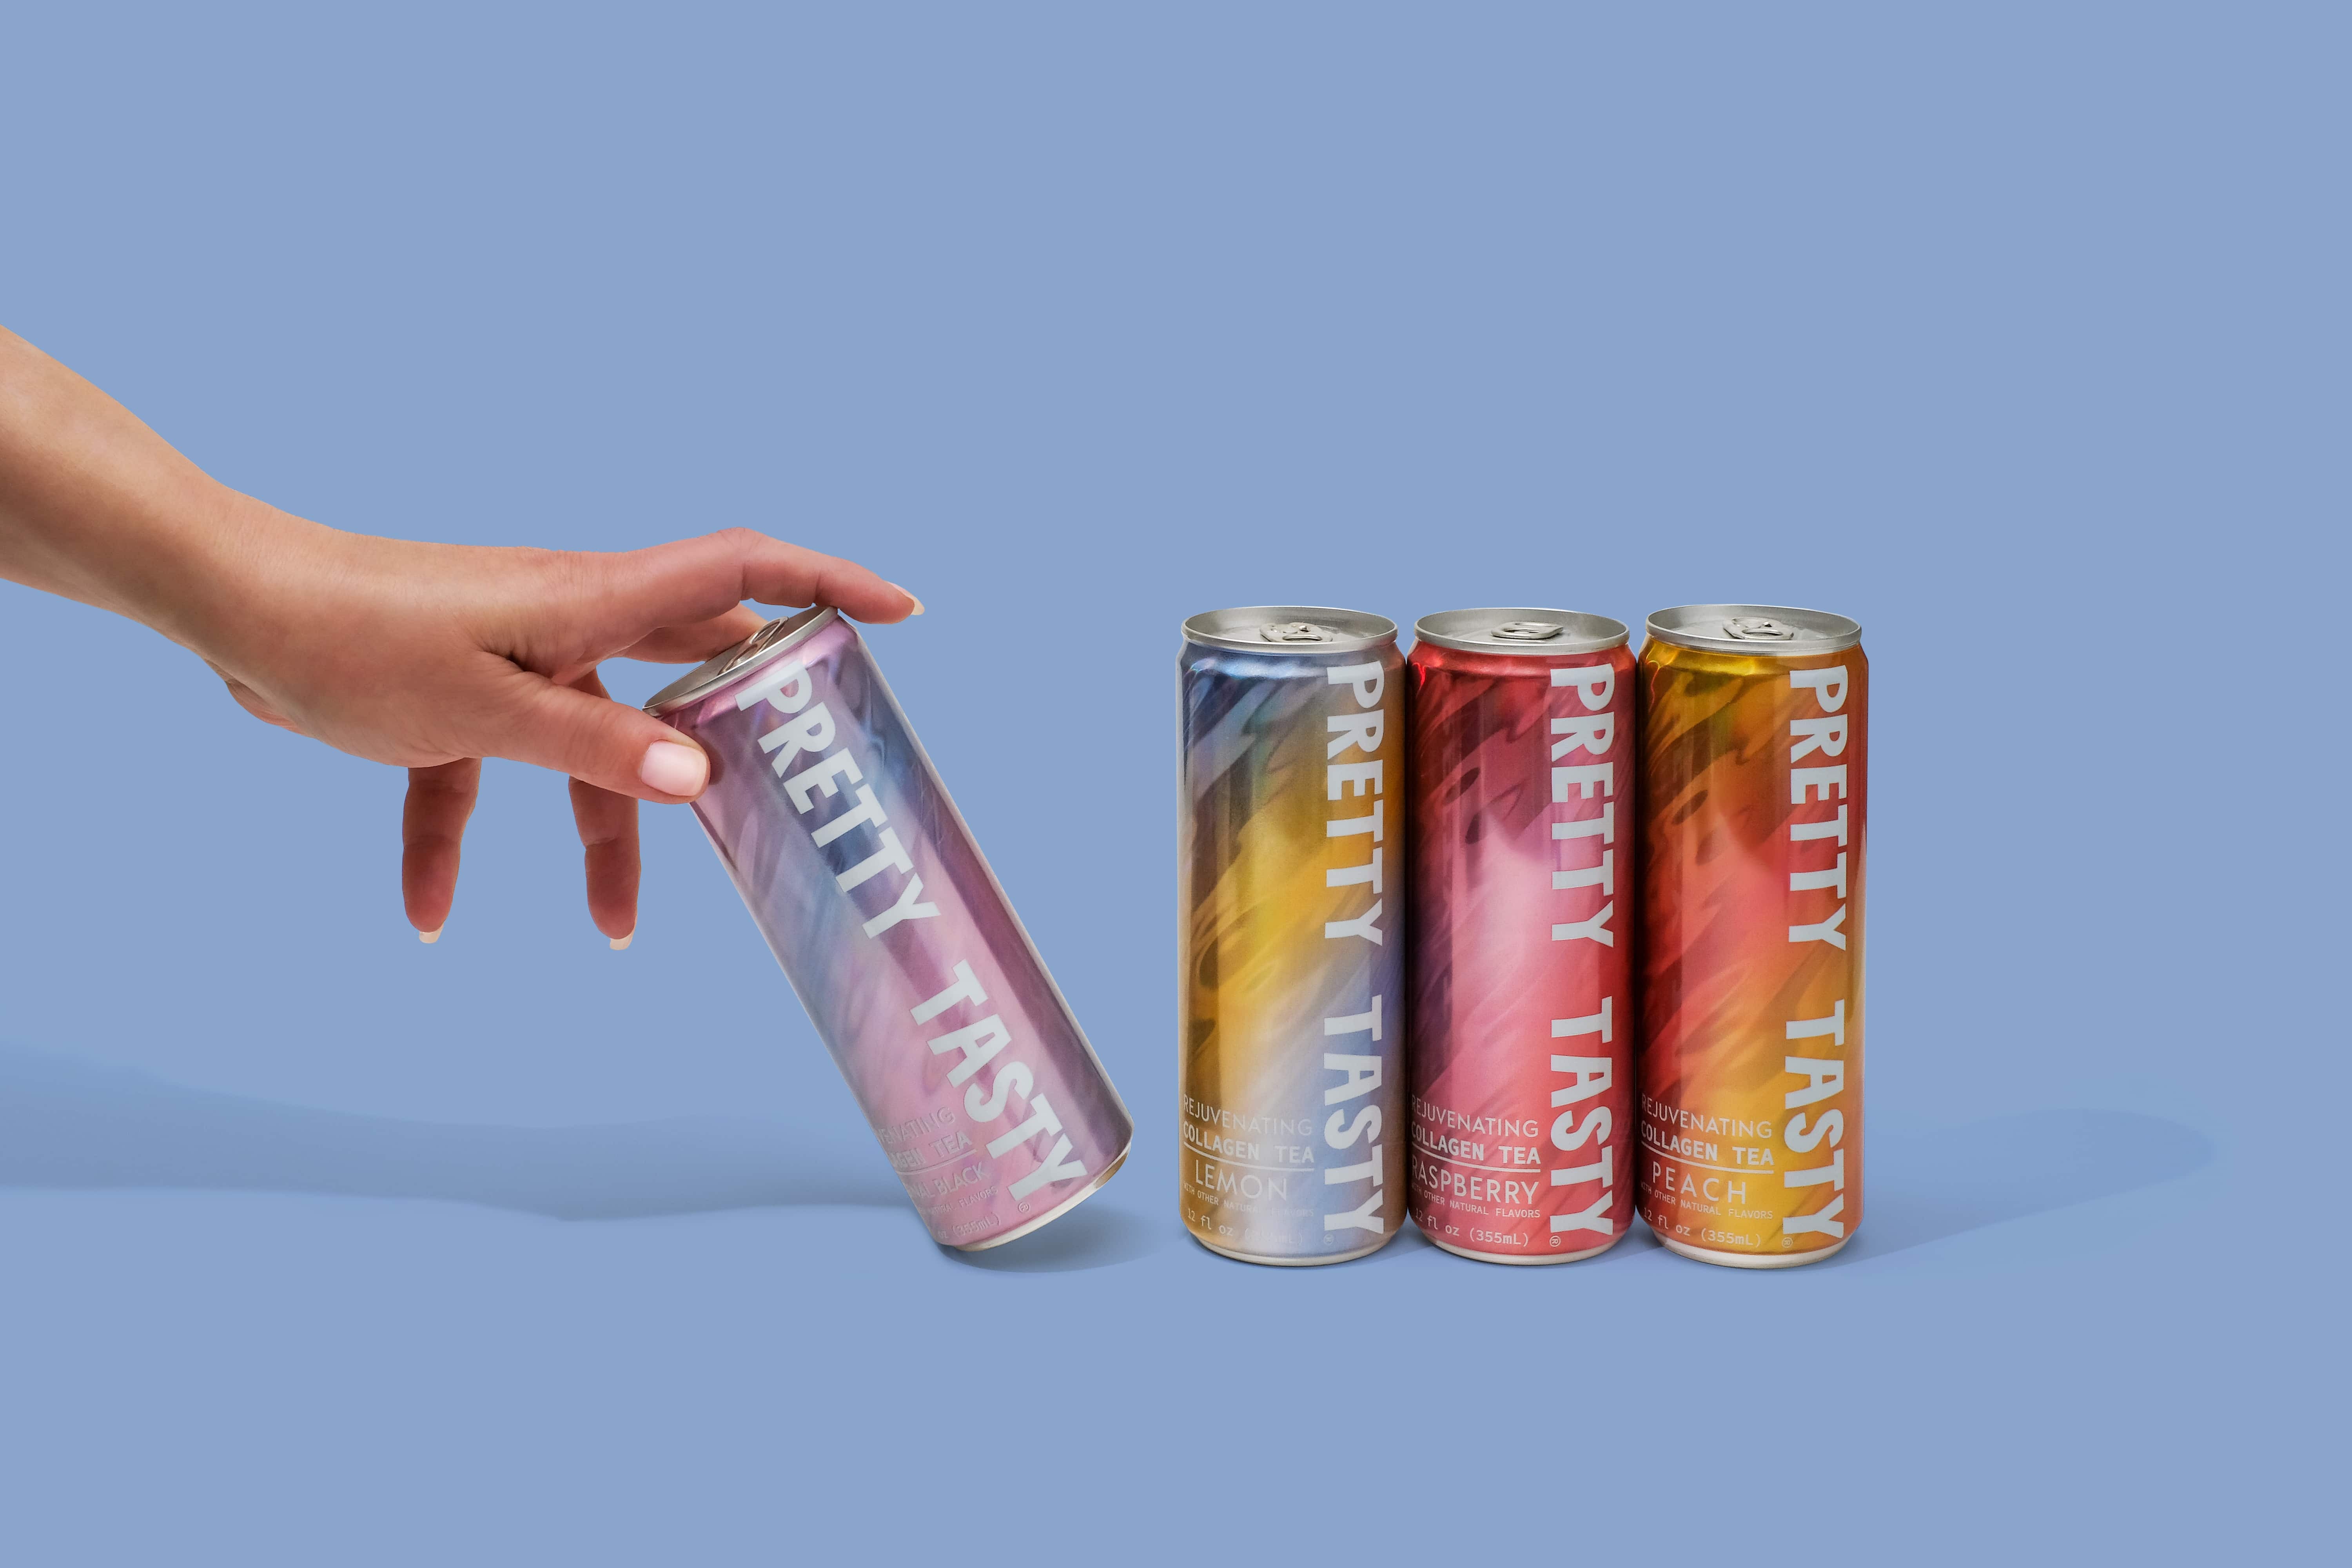 PRETTY TASTY LAUNCHES TO REVOLUTIONIZE THE BEAUTY INDUSTRY WITH A REJUVENATING, READY-TO-DRINK COLLAGEN TEA 154